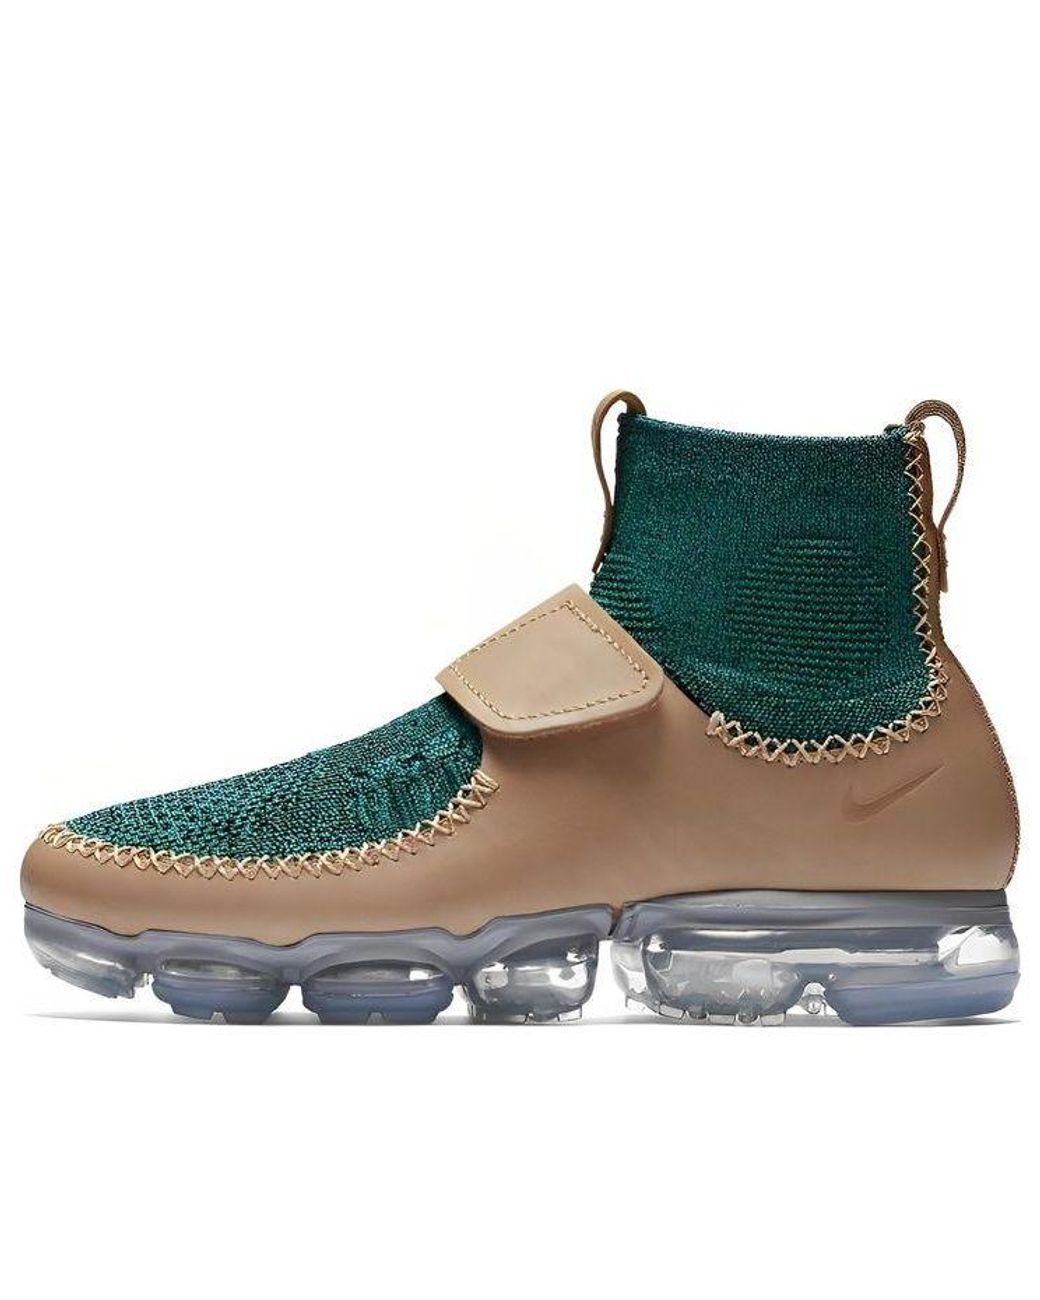 VaporMax by Marc Newson and Nike